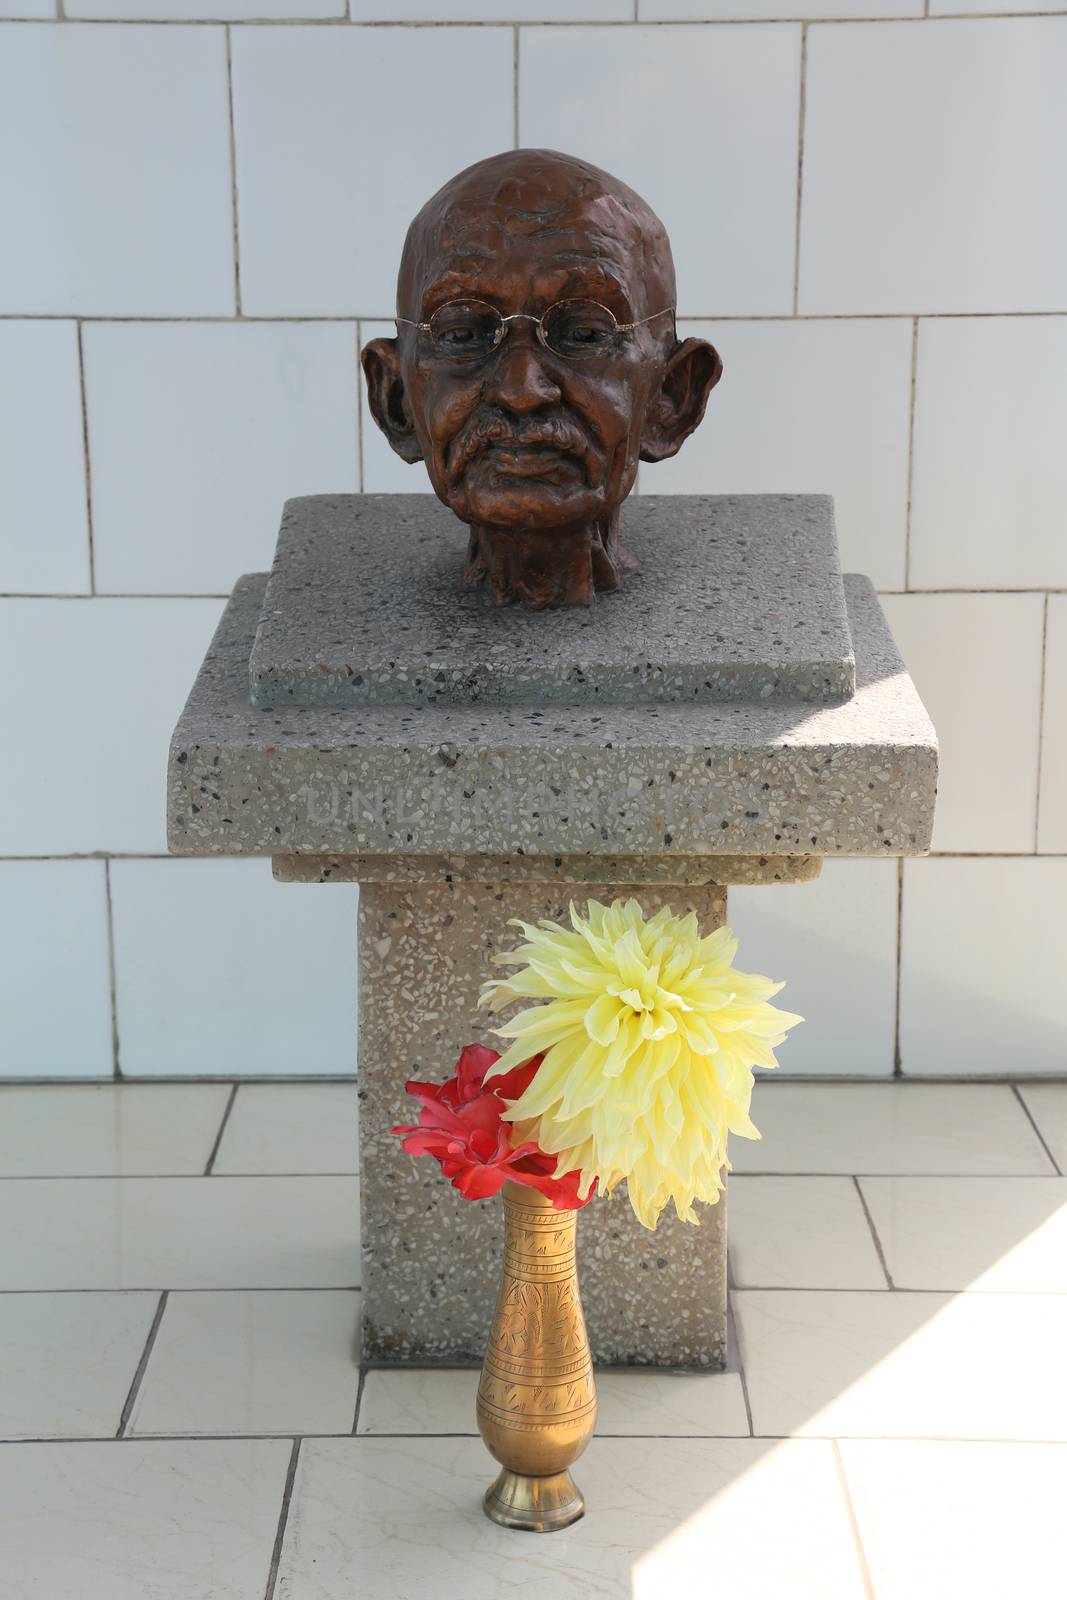 Memorial to Mahatma Gandhi in Gandhiji Prem Nivas( Leprosy centre), one of the houses established by Mother Teresa and run by the Missionaries of Charity in Titagarh, India